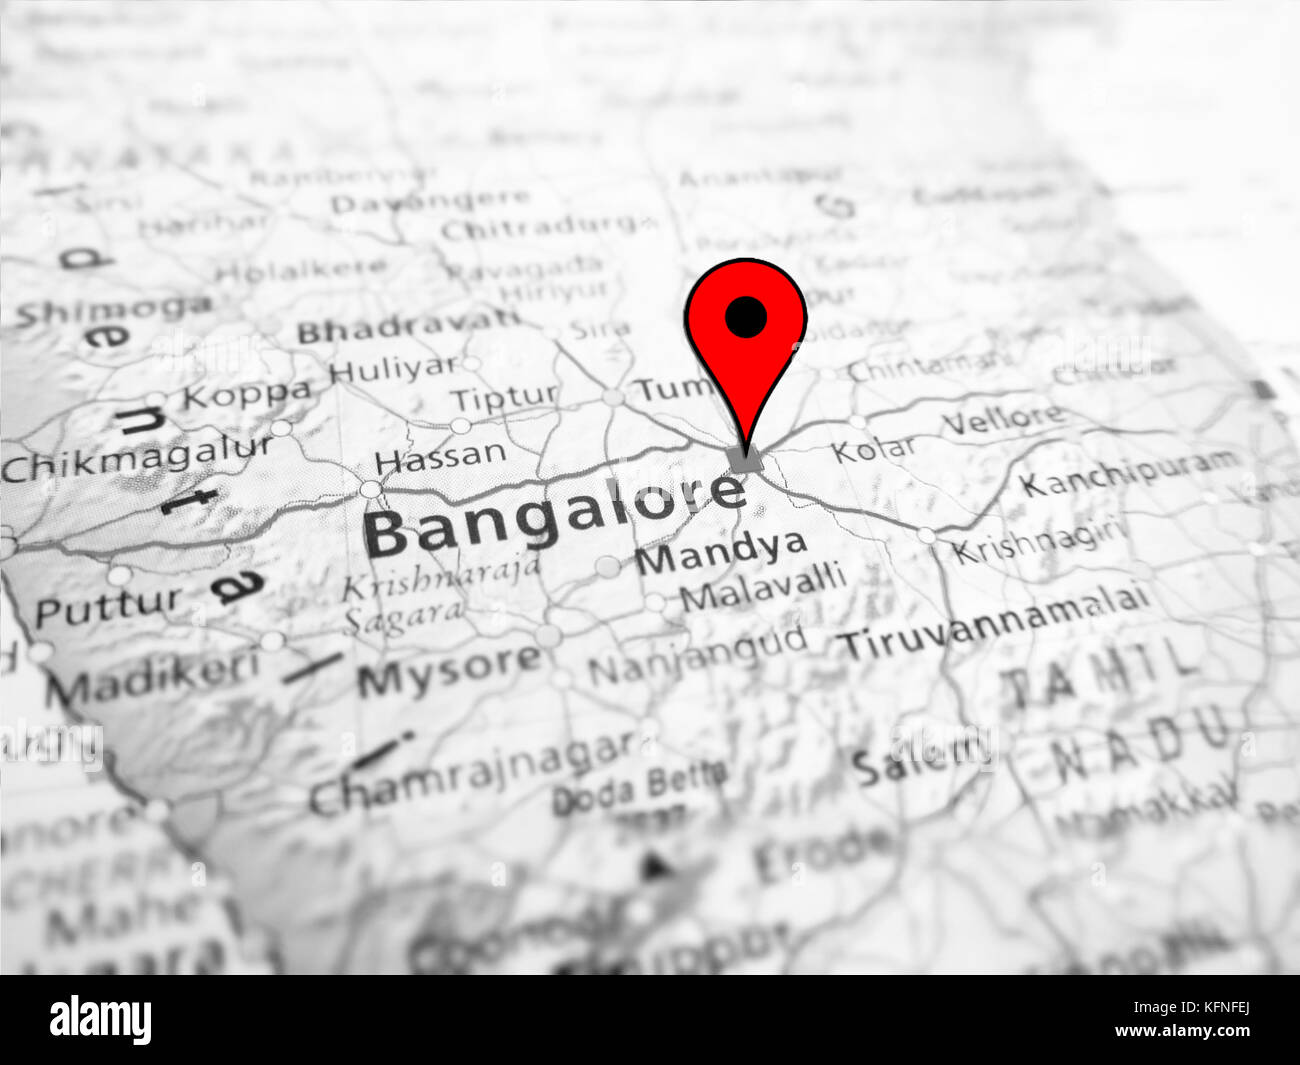 Bangalore city over a road map (India) Stock Photo